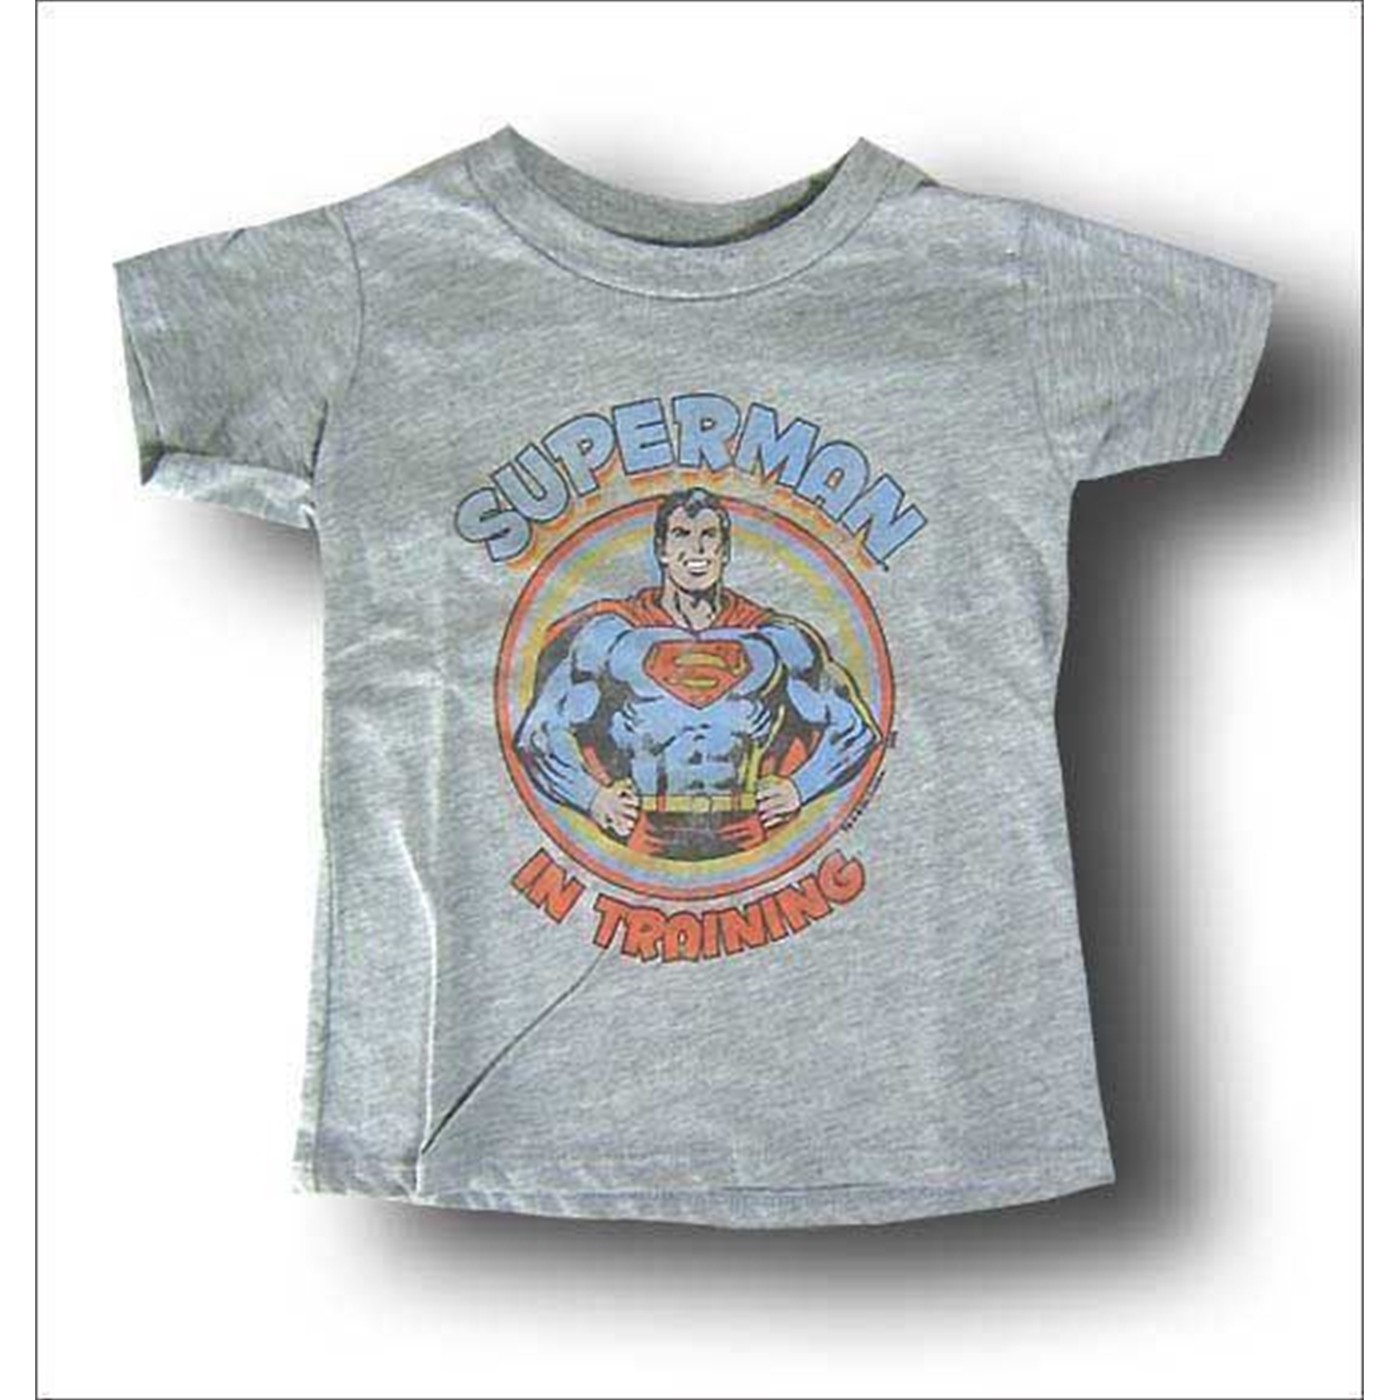 Superman In Training Toddler T-Shirt by Junk Food